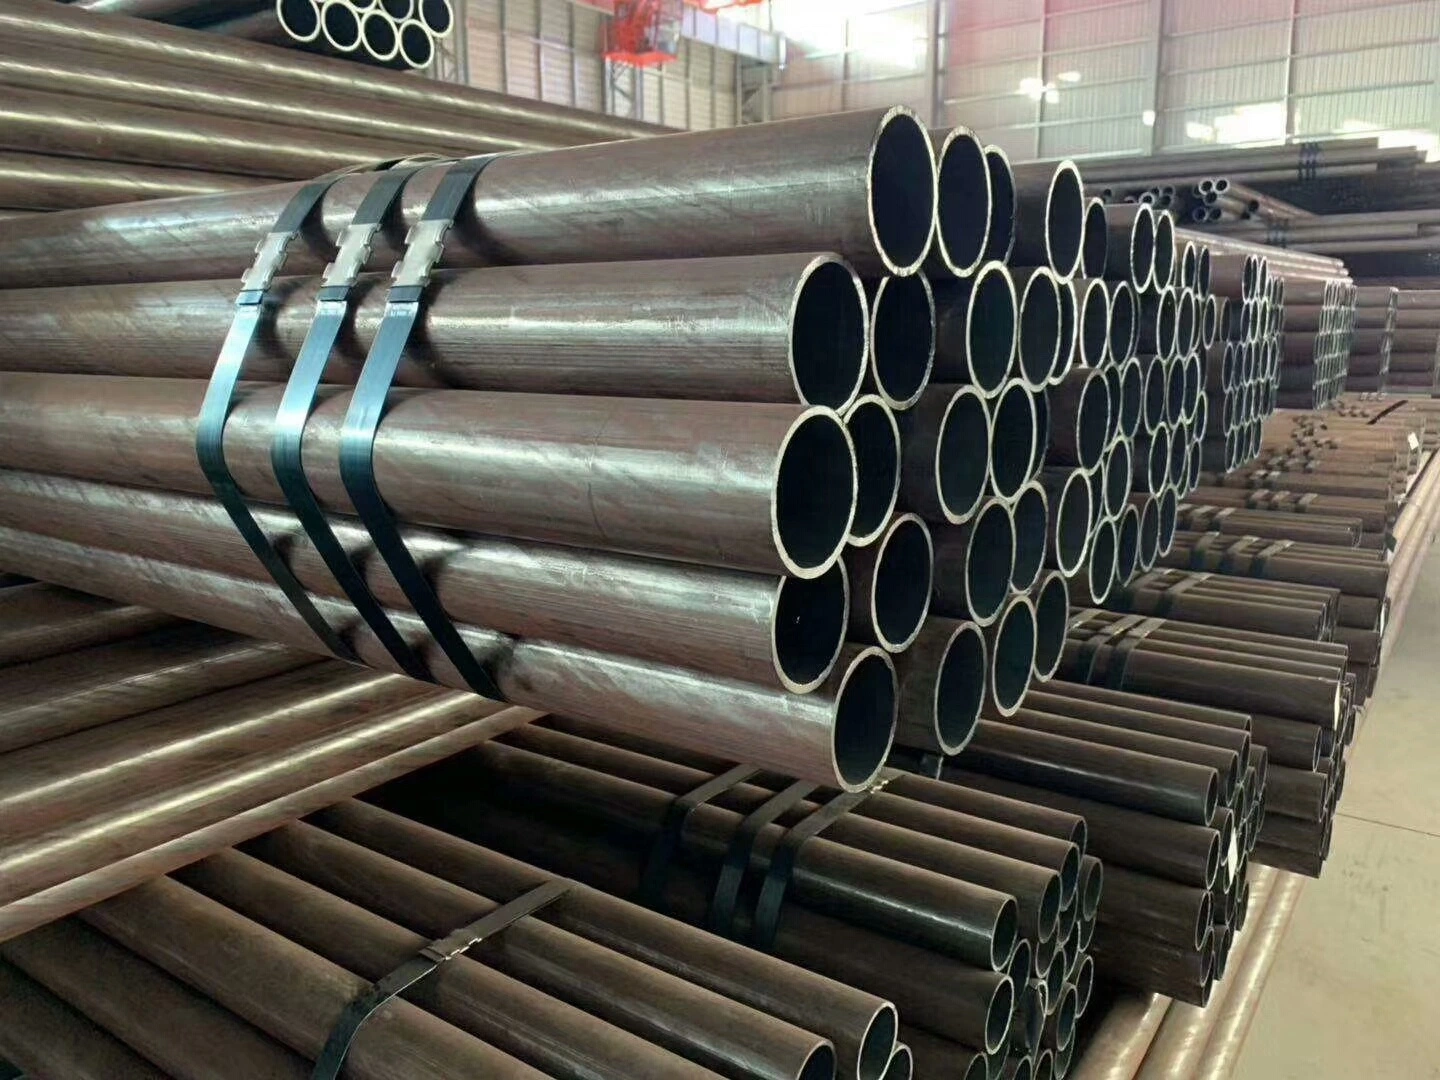 Seamless/Welded/ Hot Rolled/Cold Rolled/ Black Iron Hollow Section Carbon Steel Round Tube/Pipe SAE1020 1008 Q295 Q345 Q390 Q420 Q235 Q275 #C45 #20 St37 St42